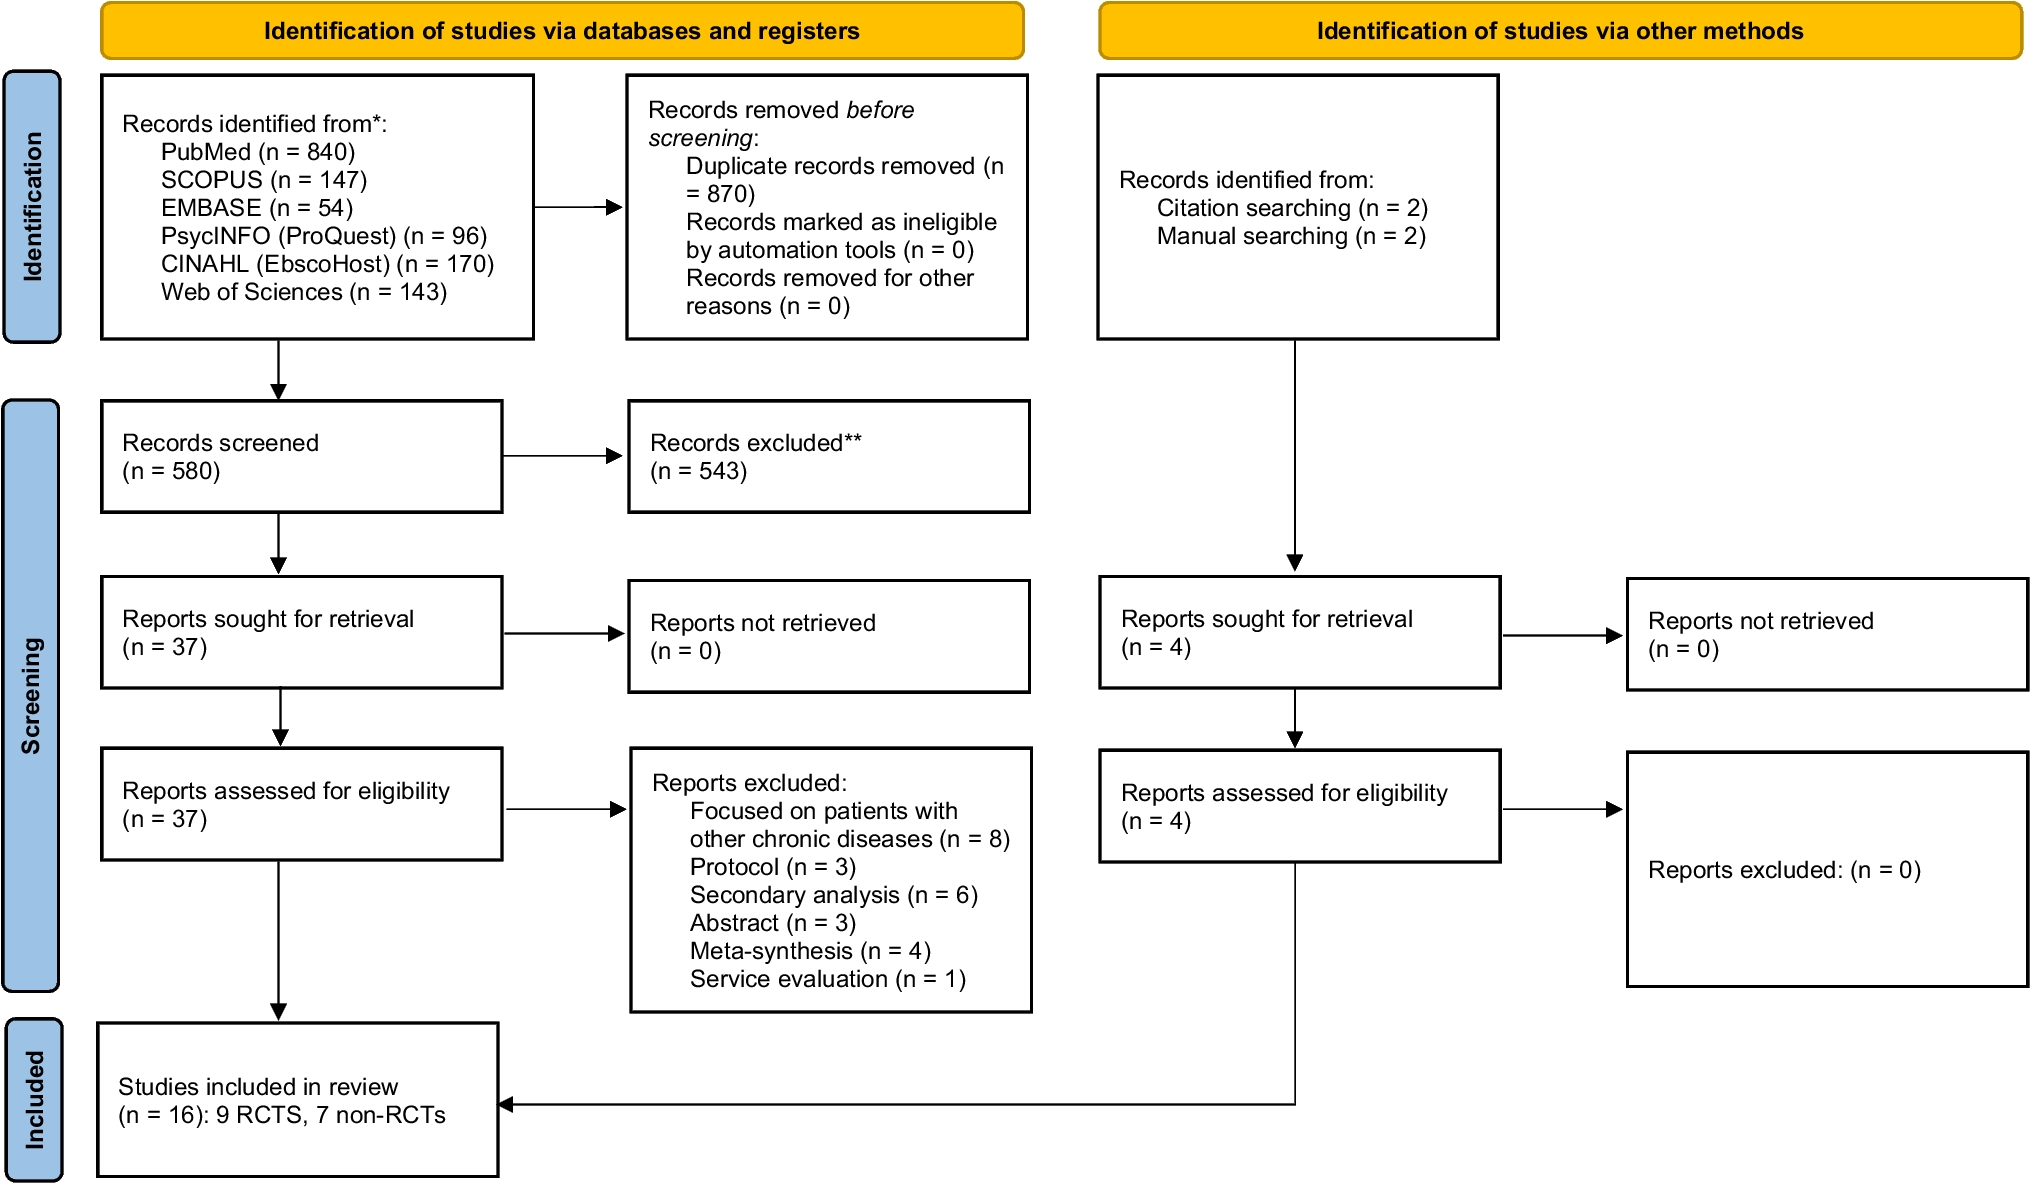 Effectiveness of dance movement therapy and dance movement interventions on cancer patients’ health-related outcomes: a systematic review and meta-analysis